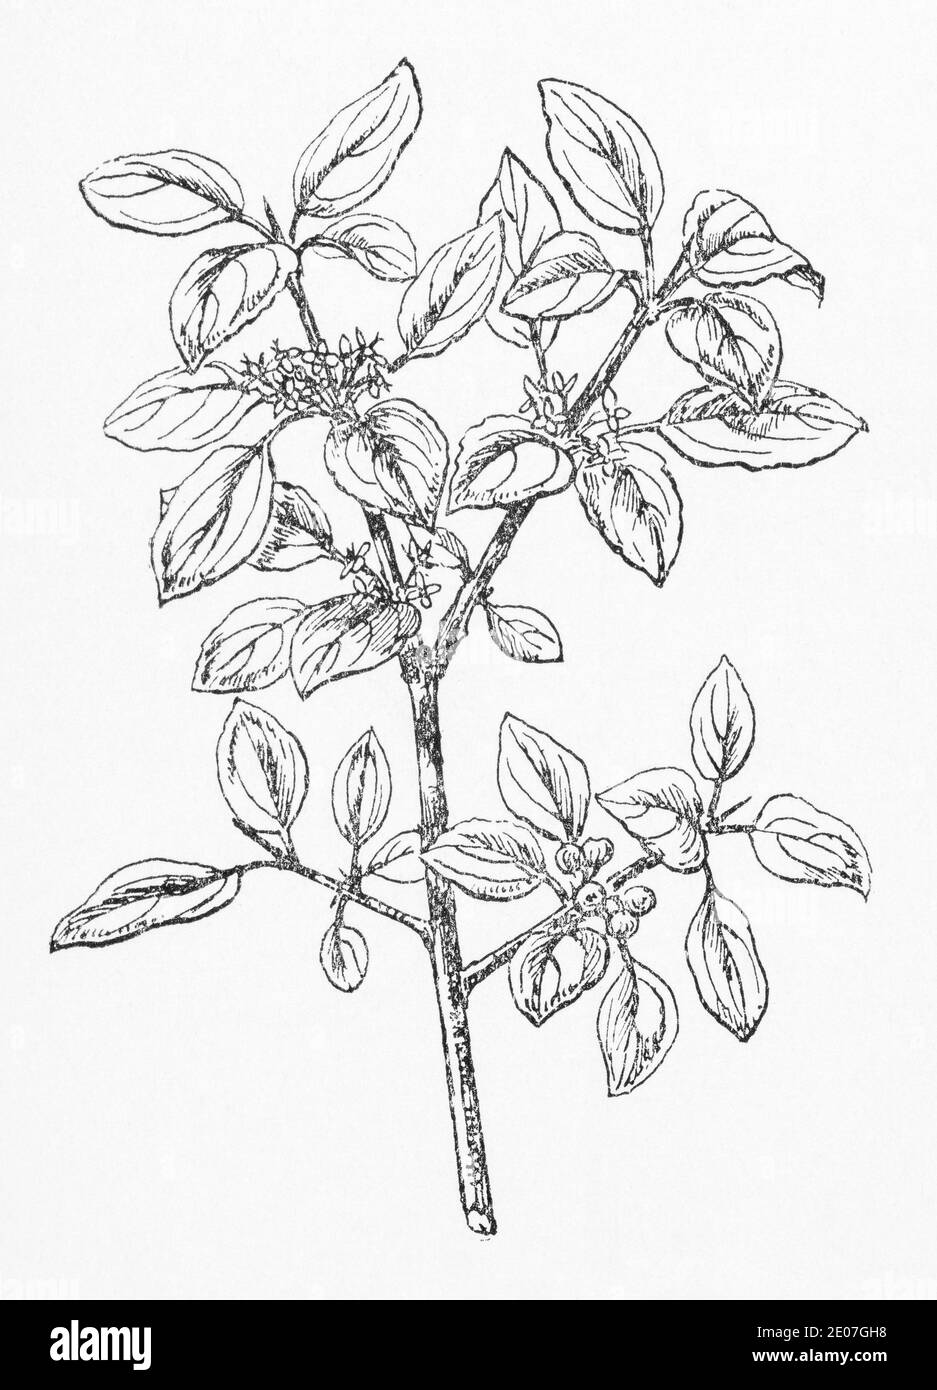 Old botanical illustration engraving of Purging Buckthorn / Rhamnus cathartica, Rhamnus catharticus. Traditional medicinal herbal plant. See Notes Stock Photo